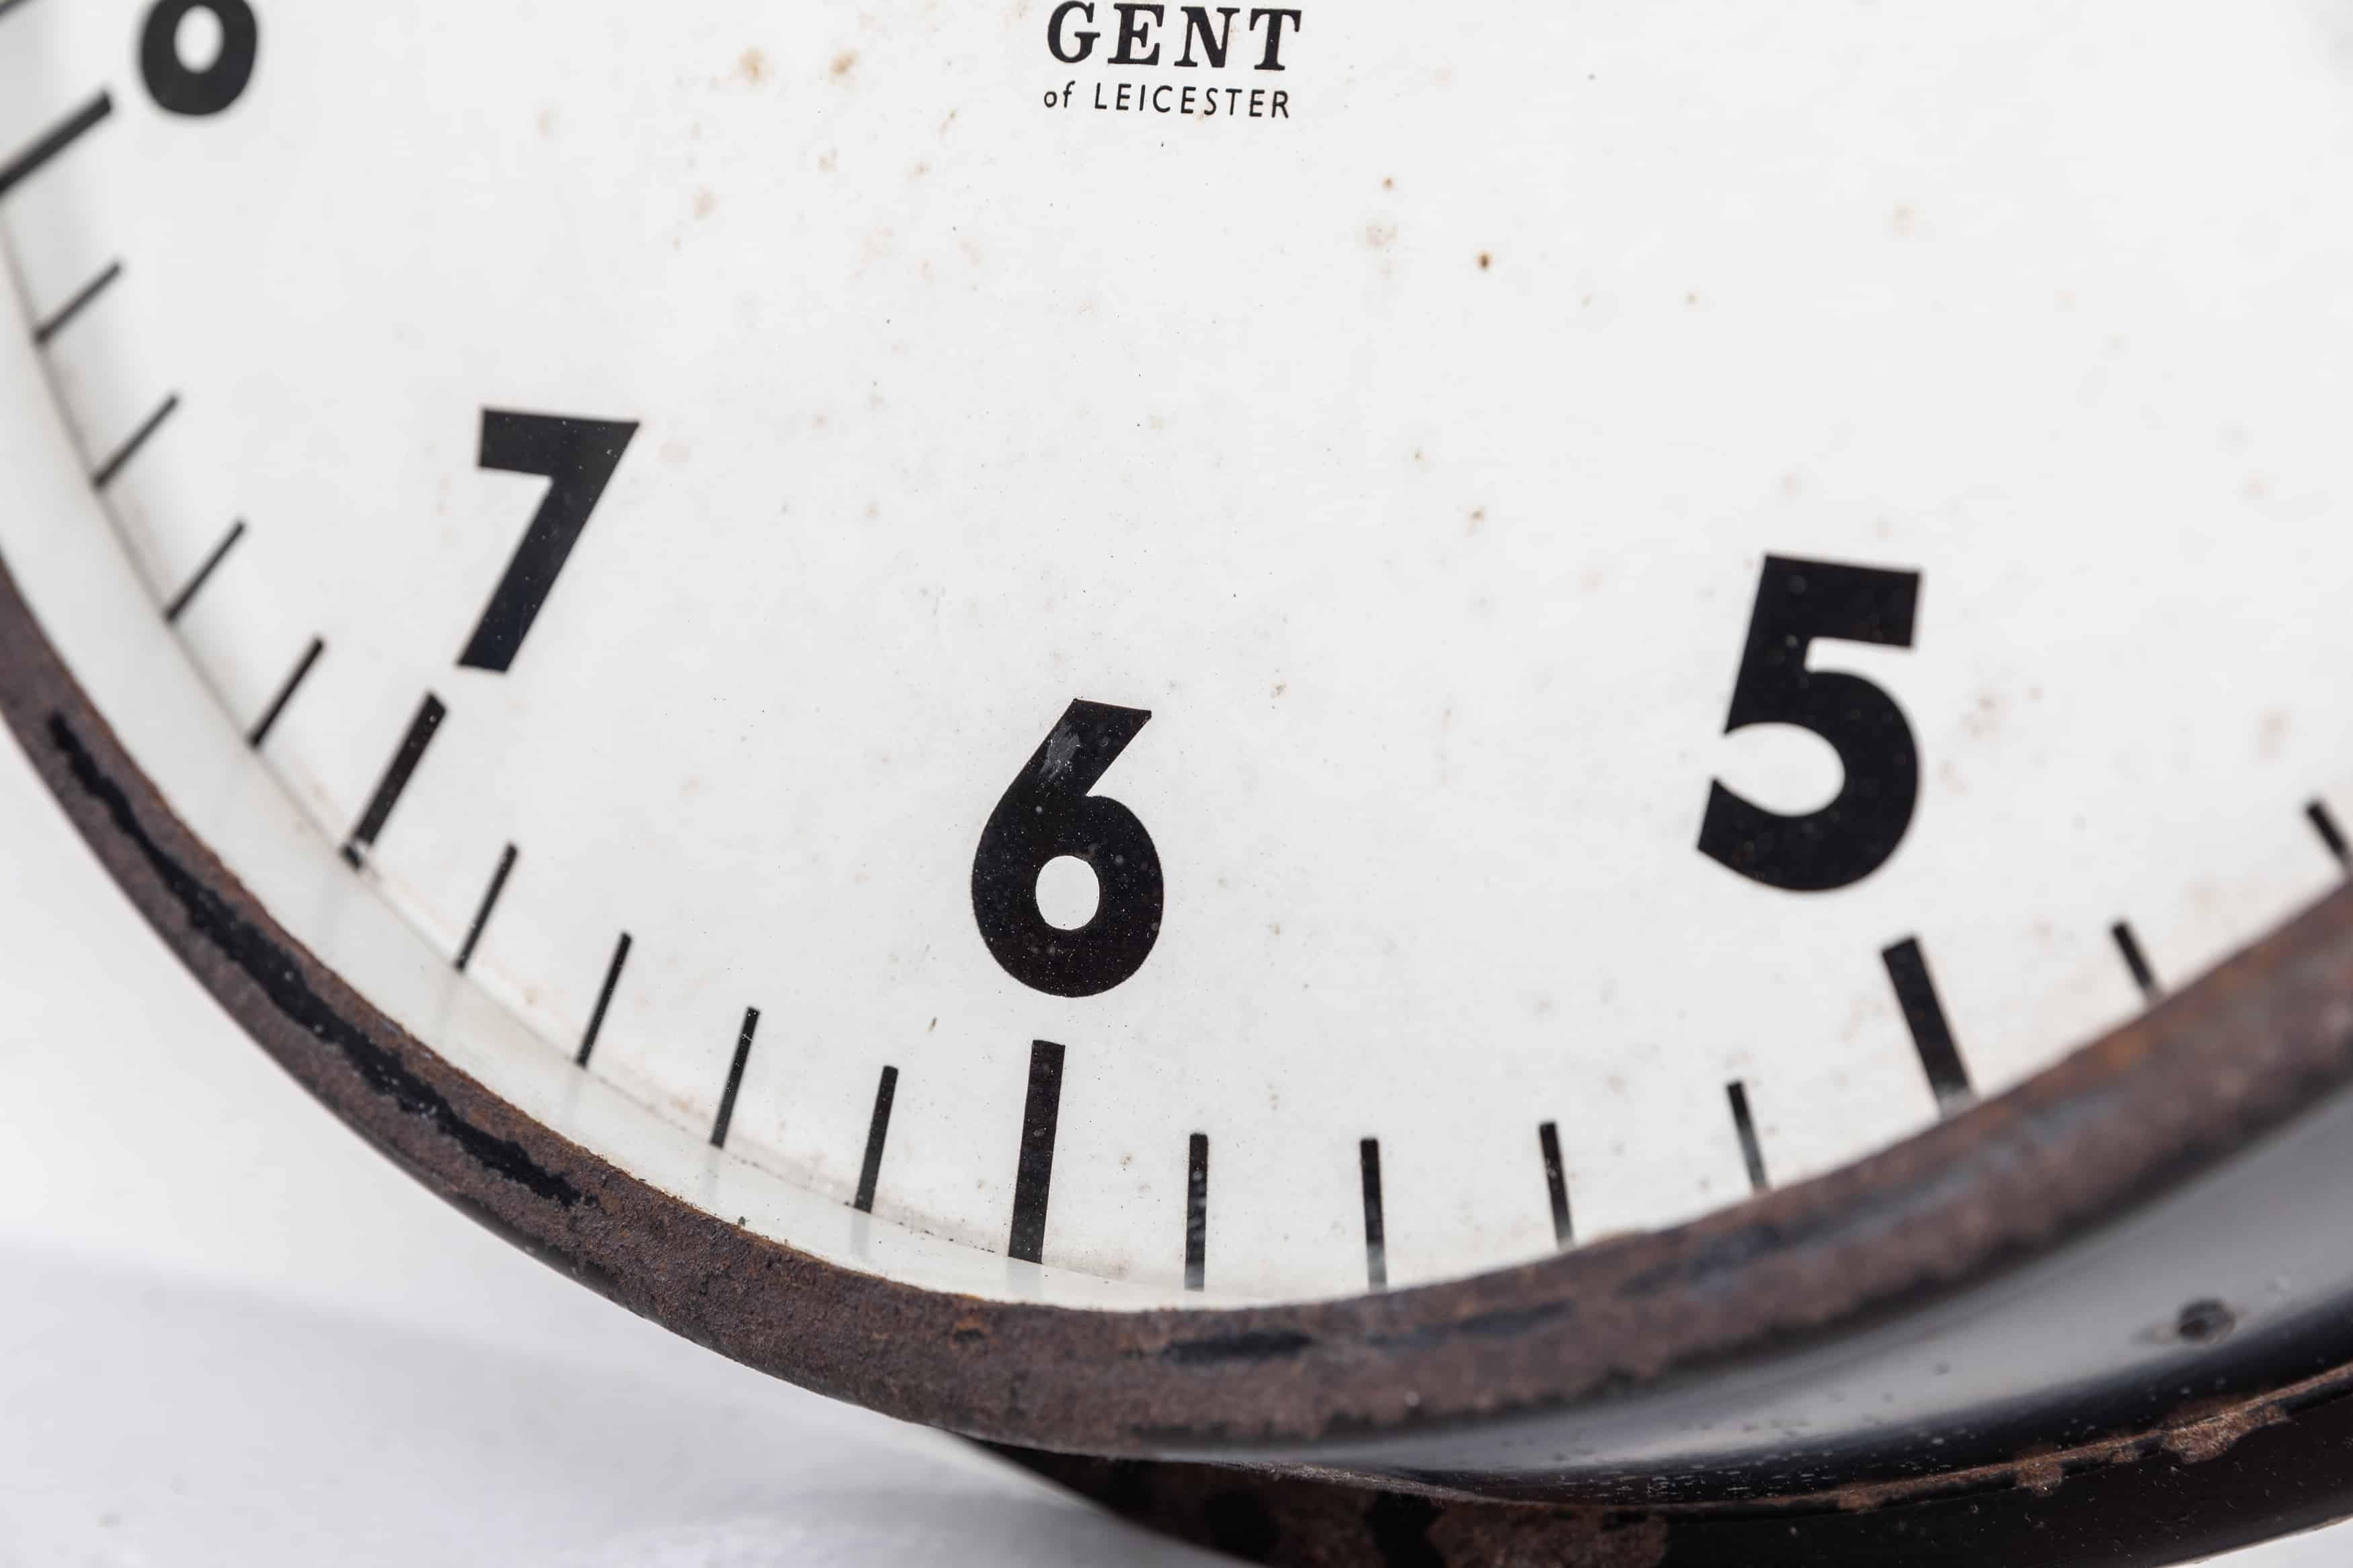 Glass Large Industrial Gents of Leicester Factory Wall Clock, c.1940